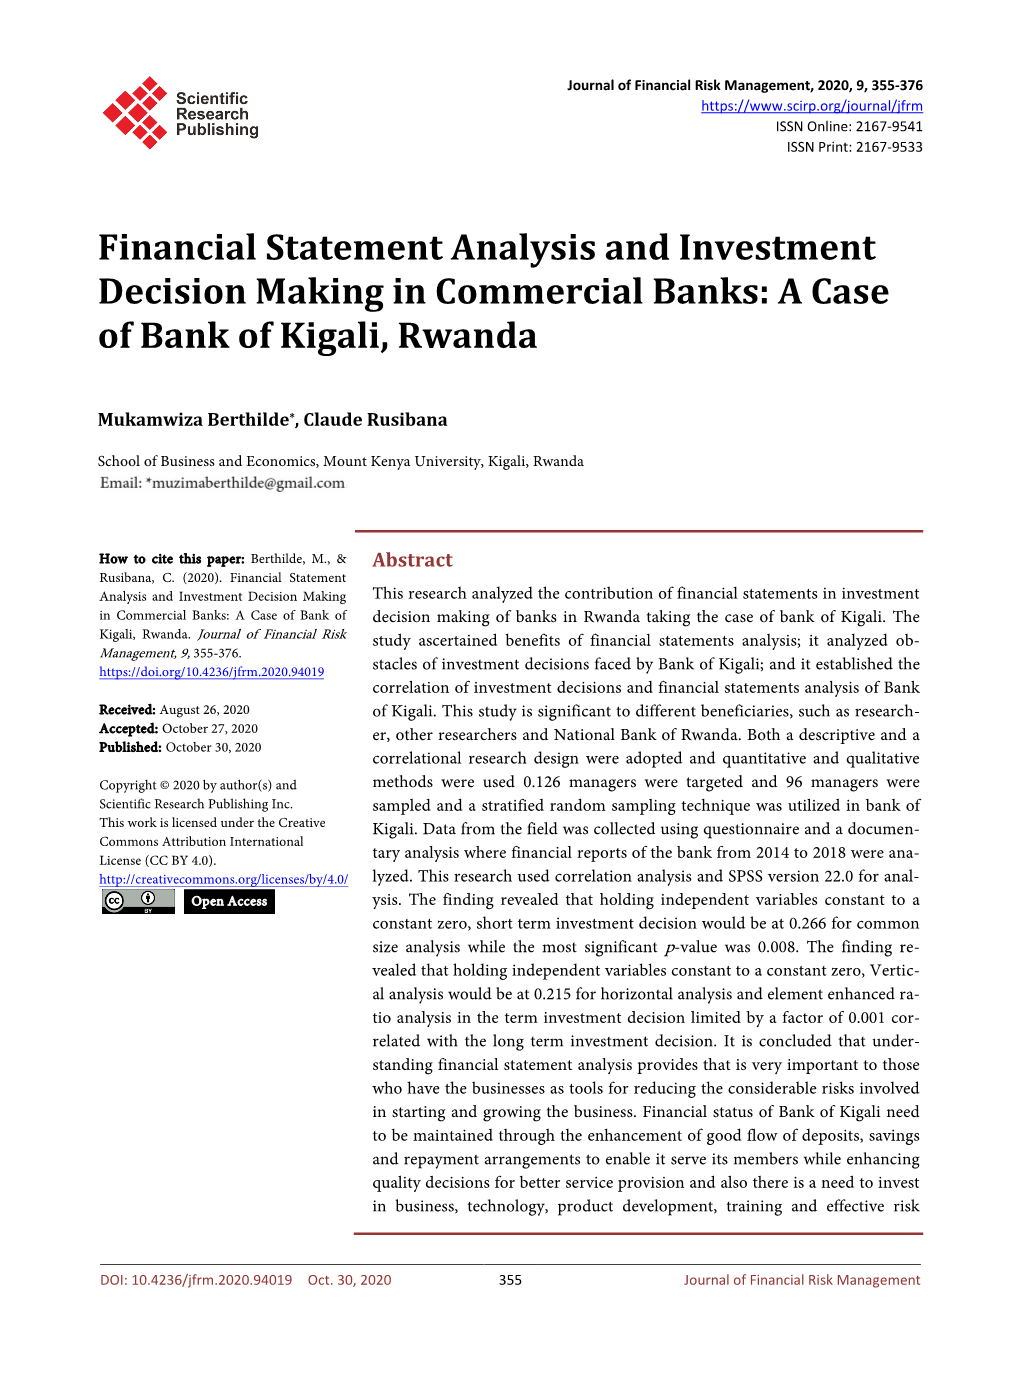 Financial Statement Analysis and Investment Decision Making in Commercial Banks: a Case of Bank of Kigali, Rwanda